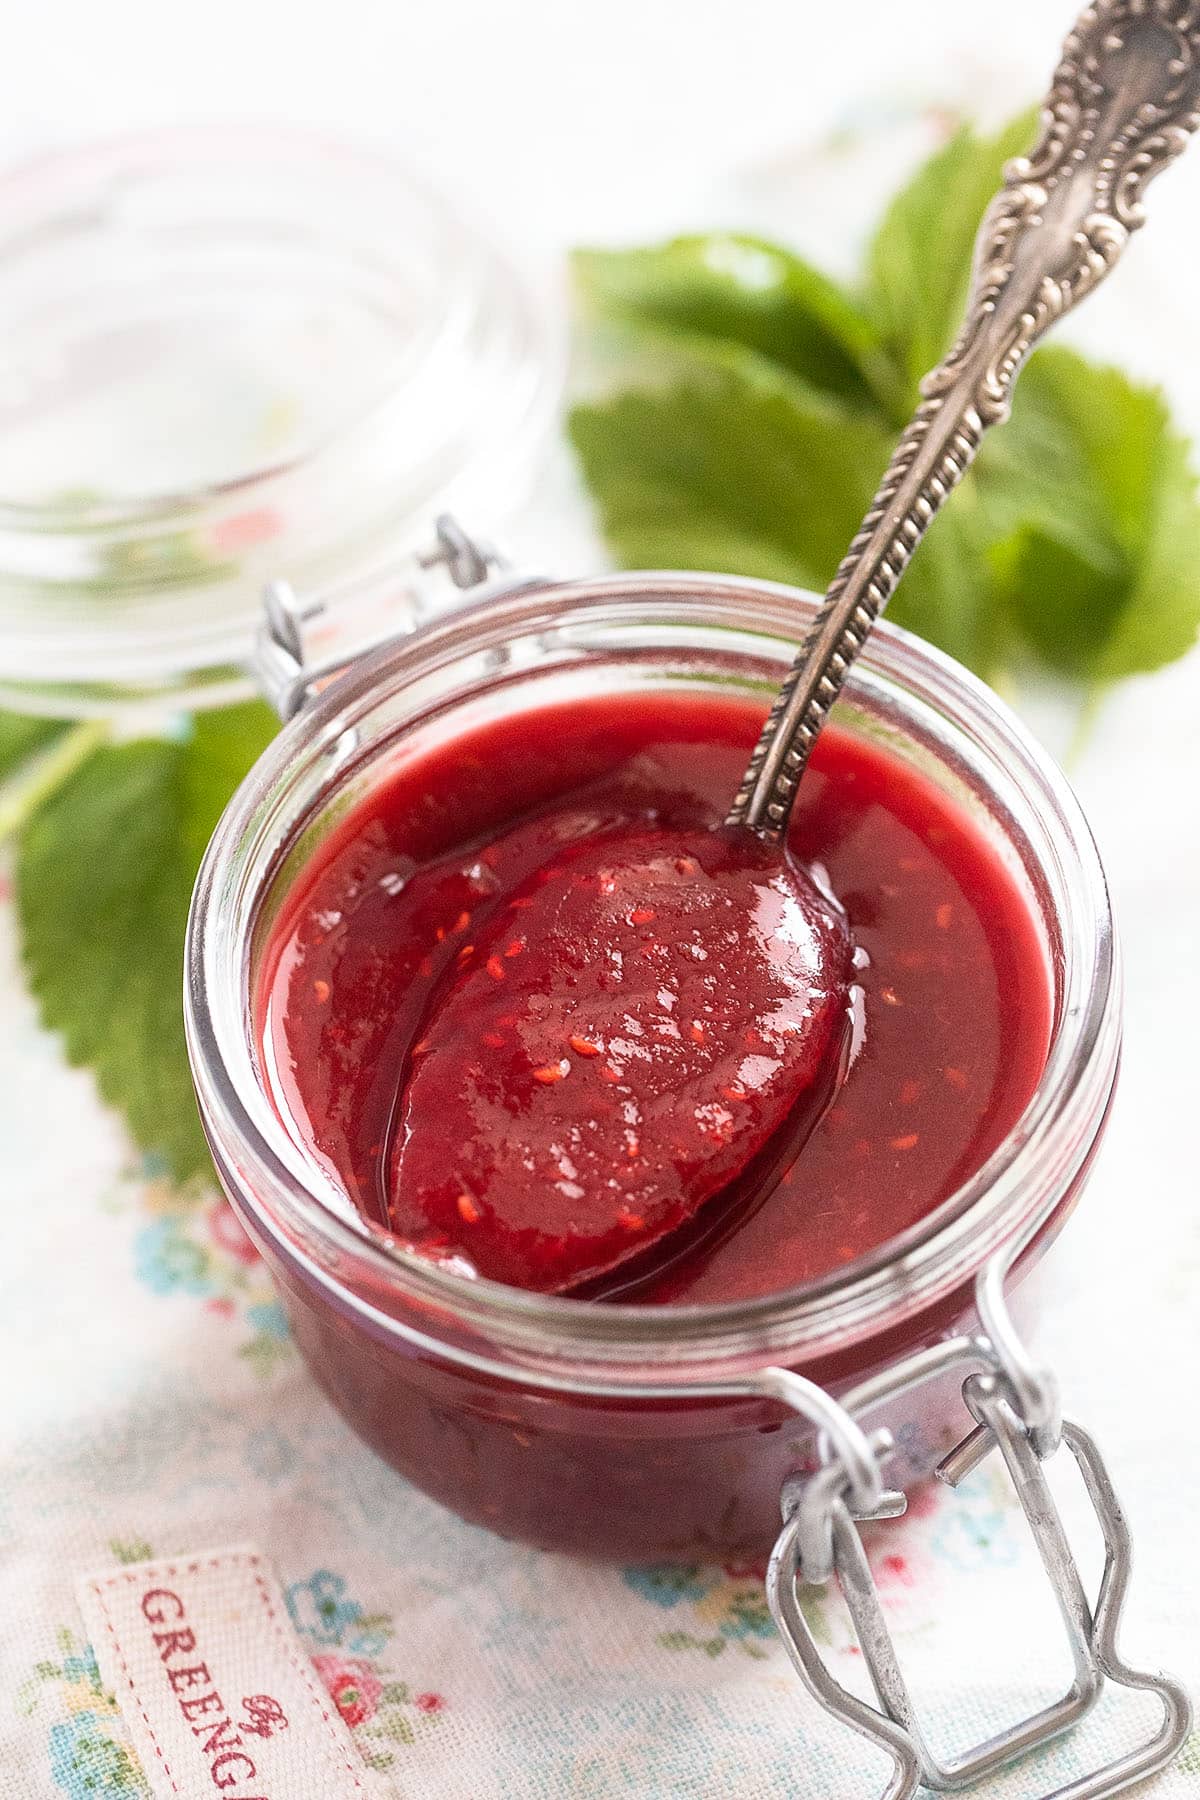 raspberry and rhubarb jam in a small jar with a spoon.